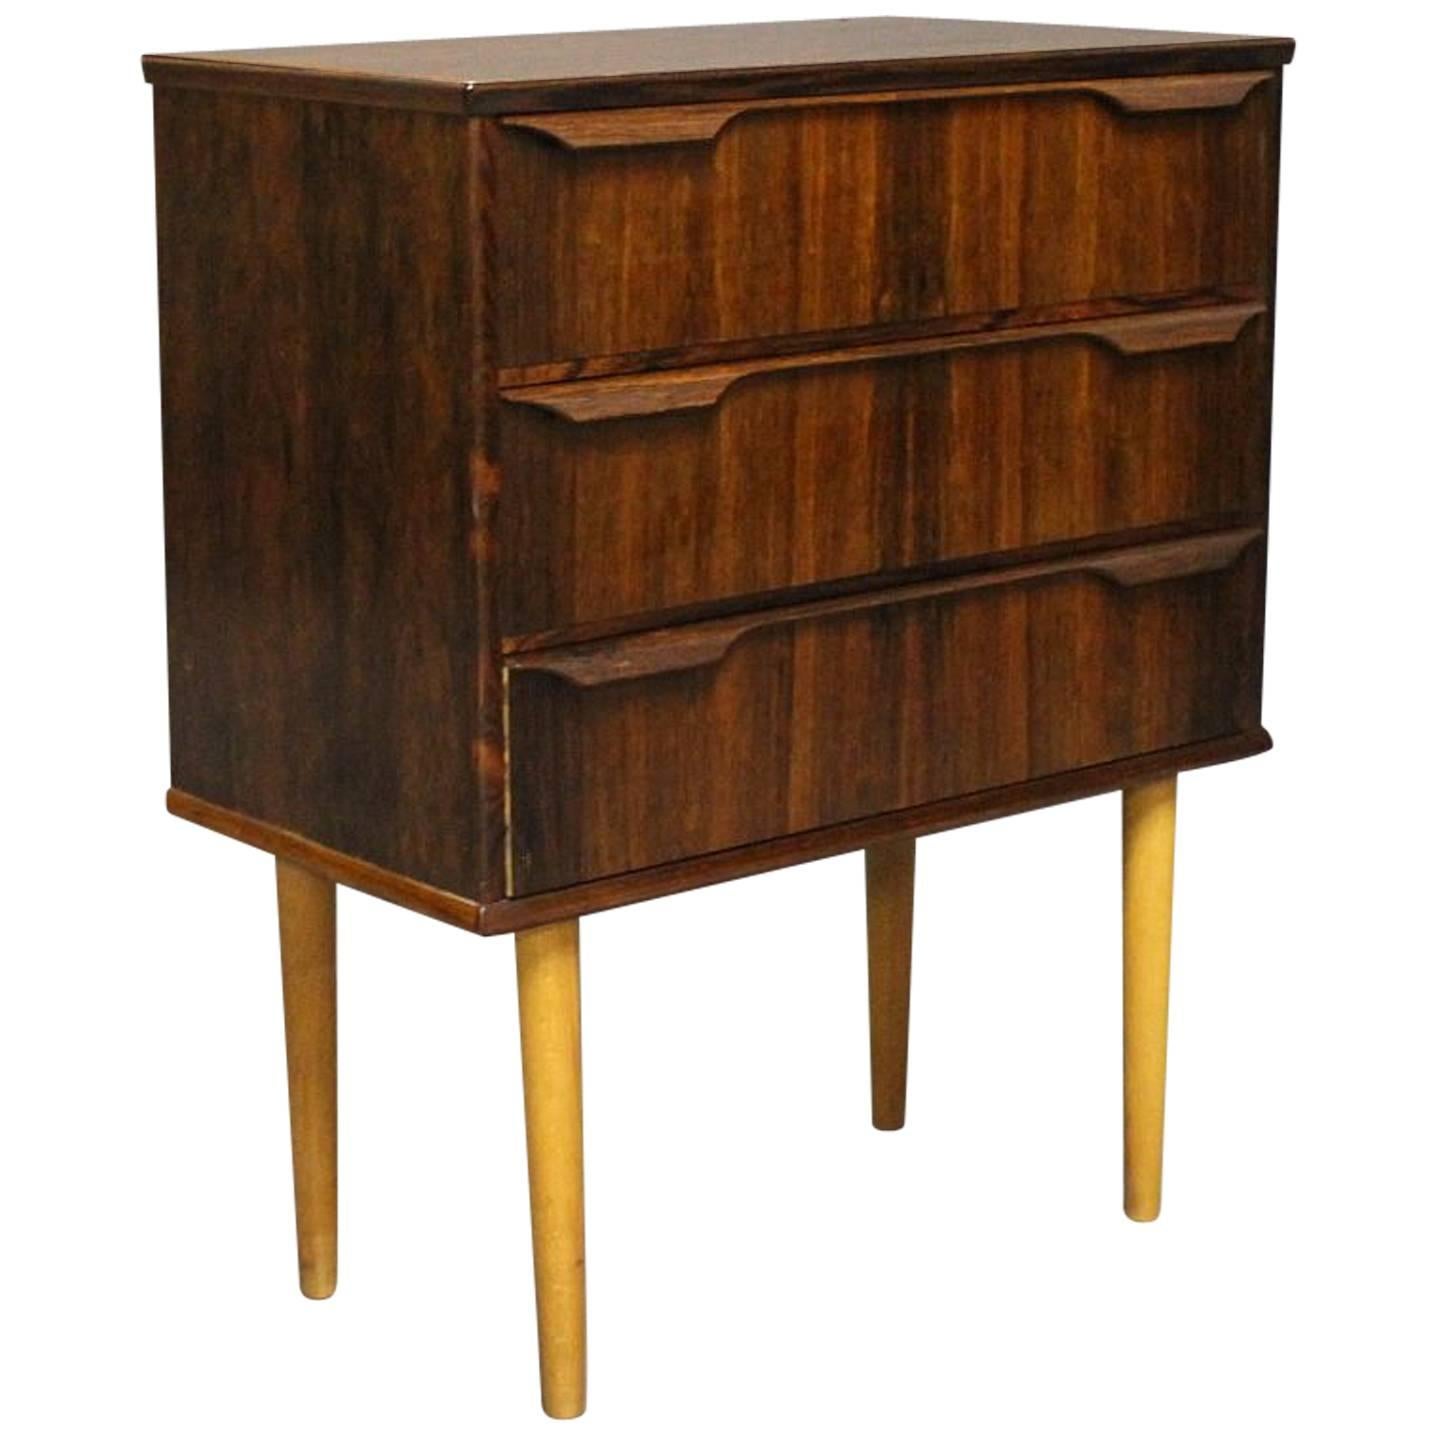 Small Chest of Drawers in Rosewood by "Trekanten", Danish Design, 1960s